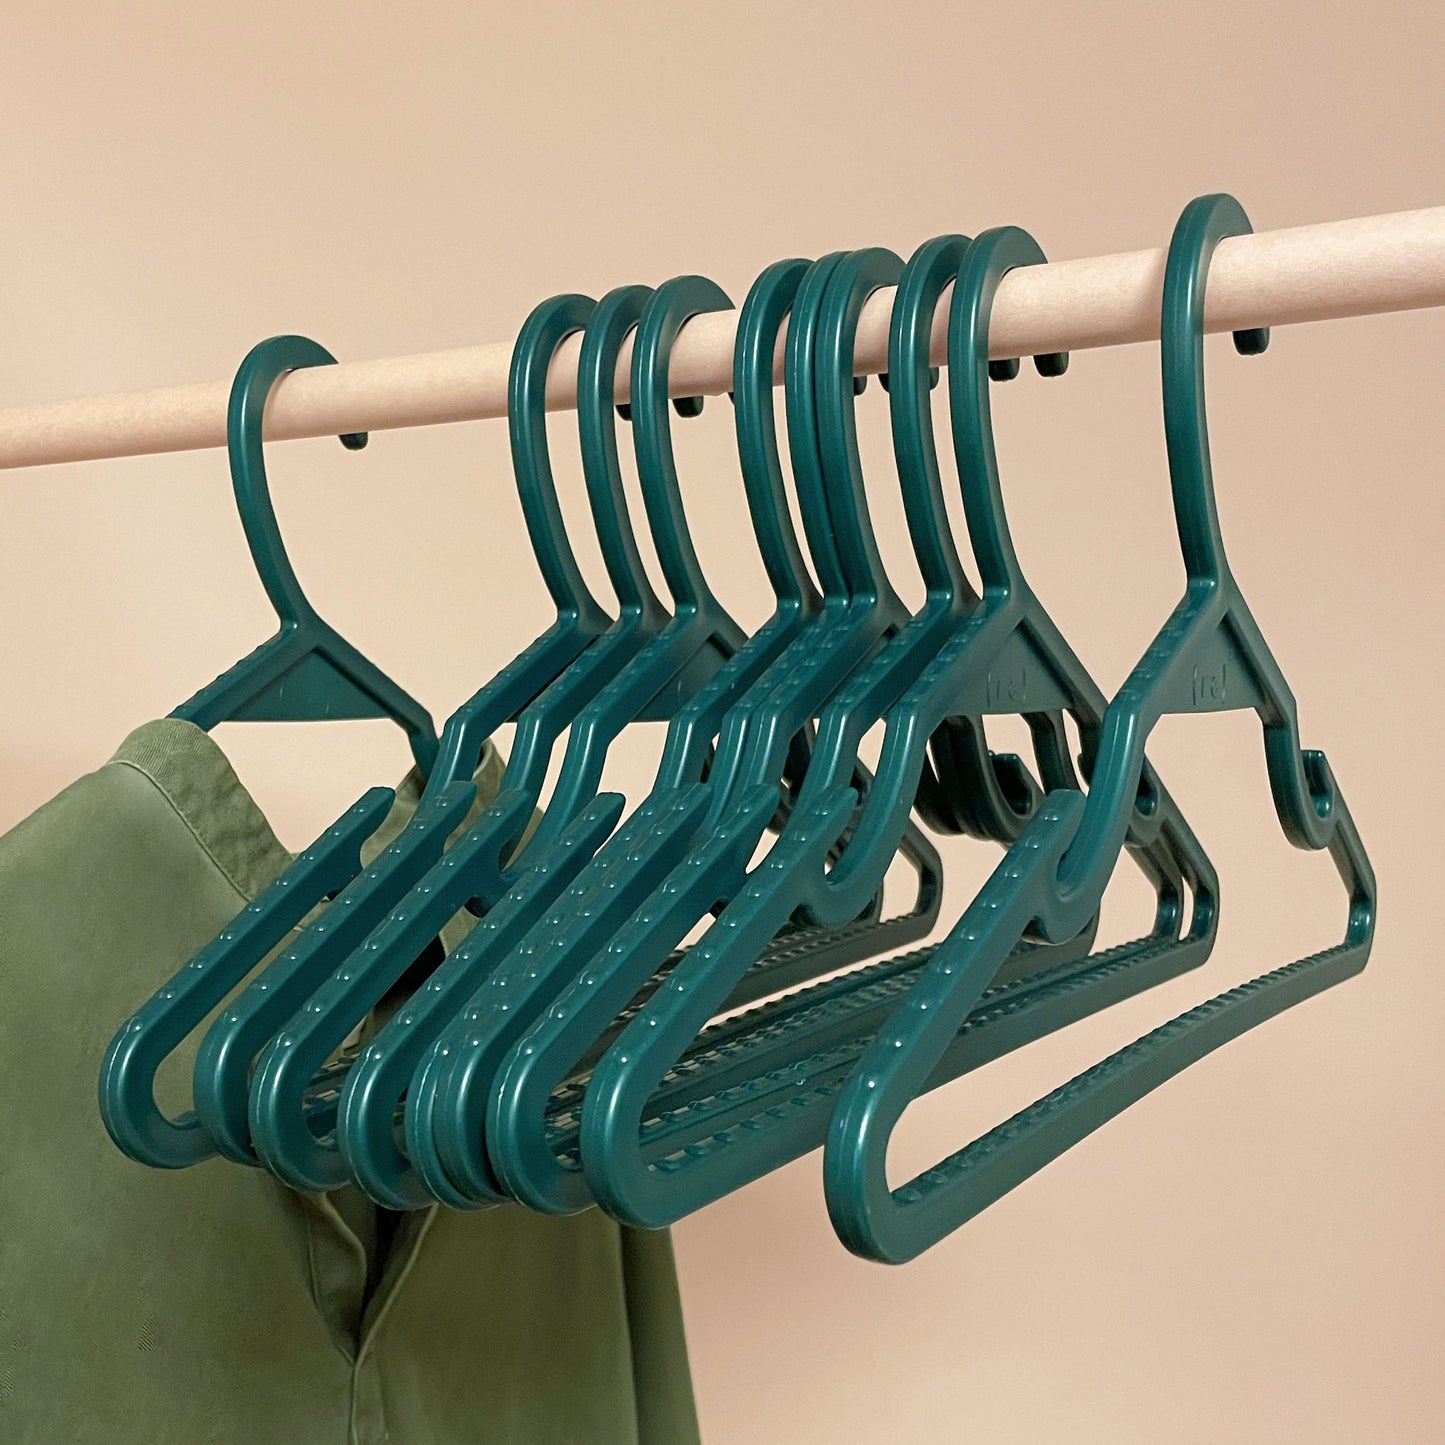 Pine green recycled ocean plastic hangers on a wooden pole; a seaweed green tunic hangs from one of the hangers